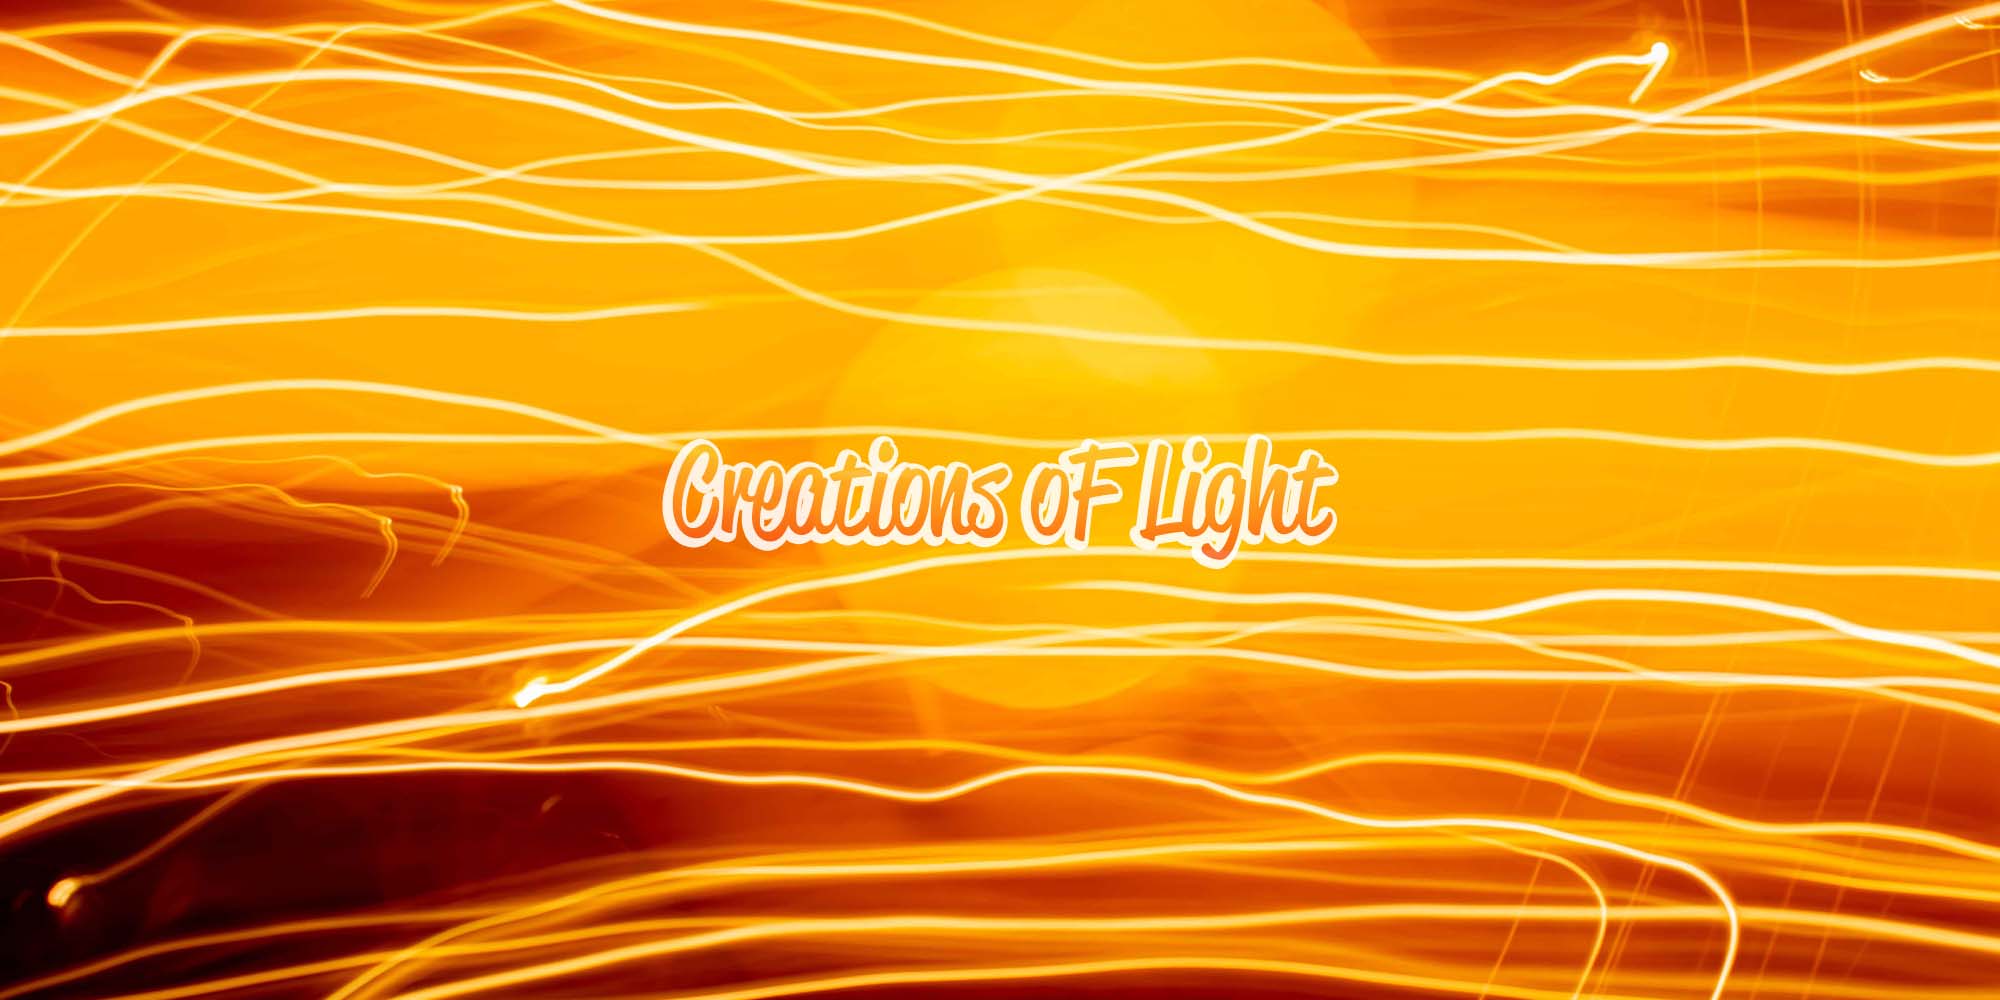 Creations of light (Airdrop Promo)